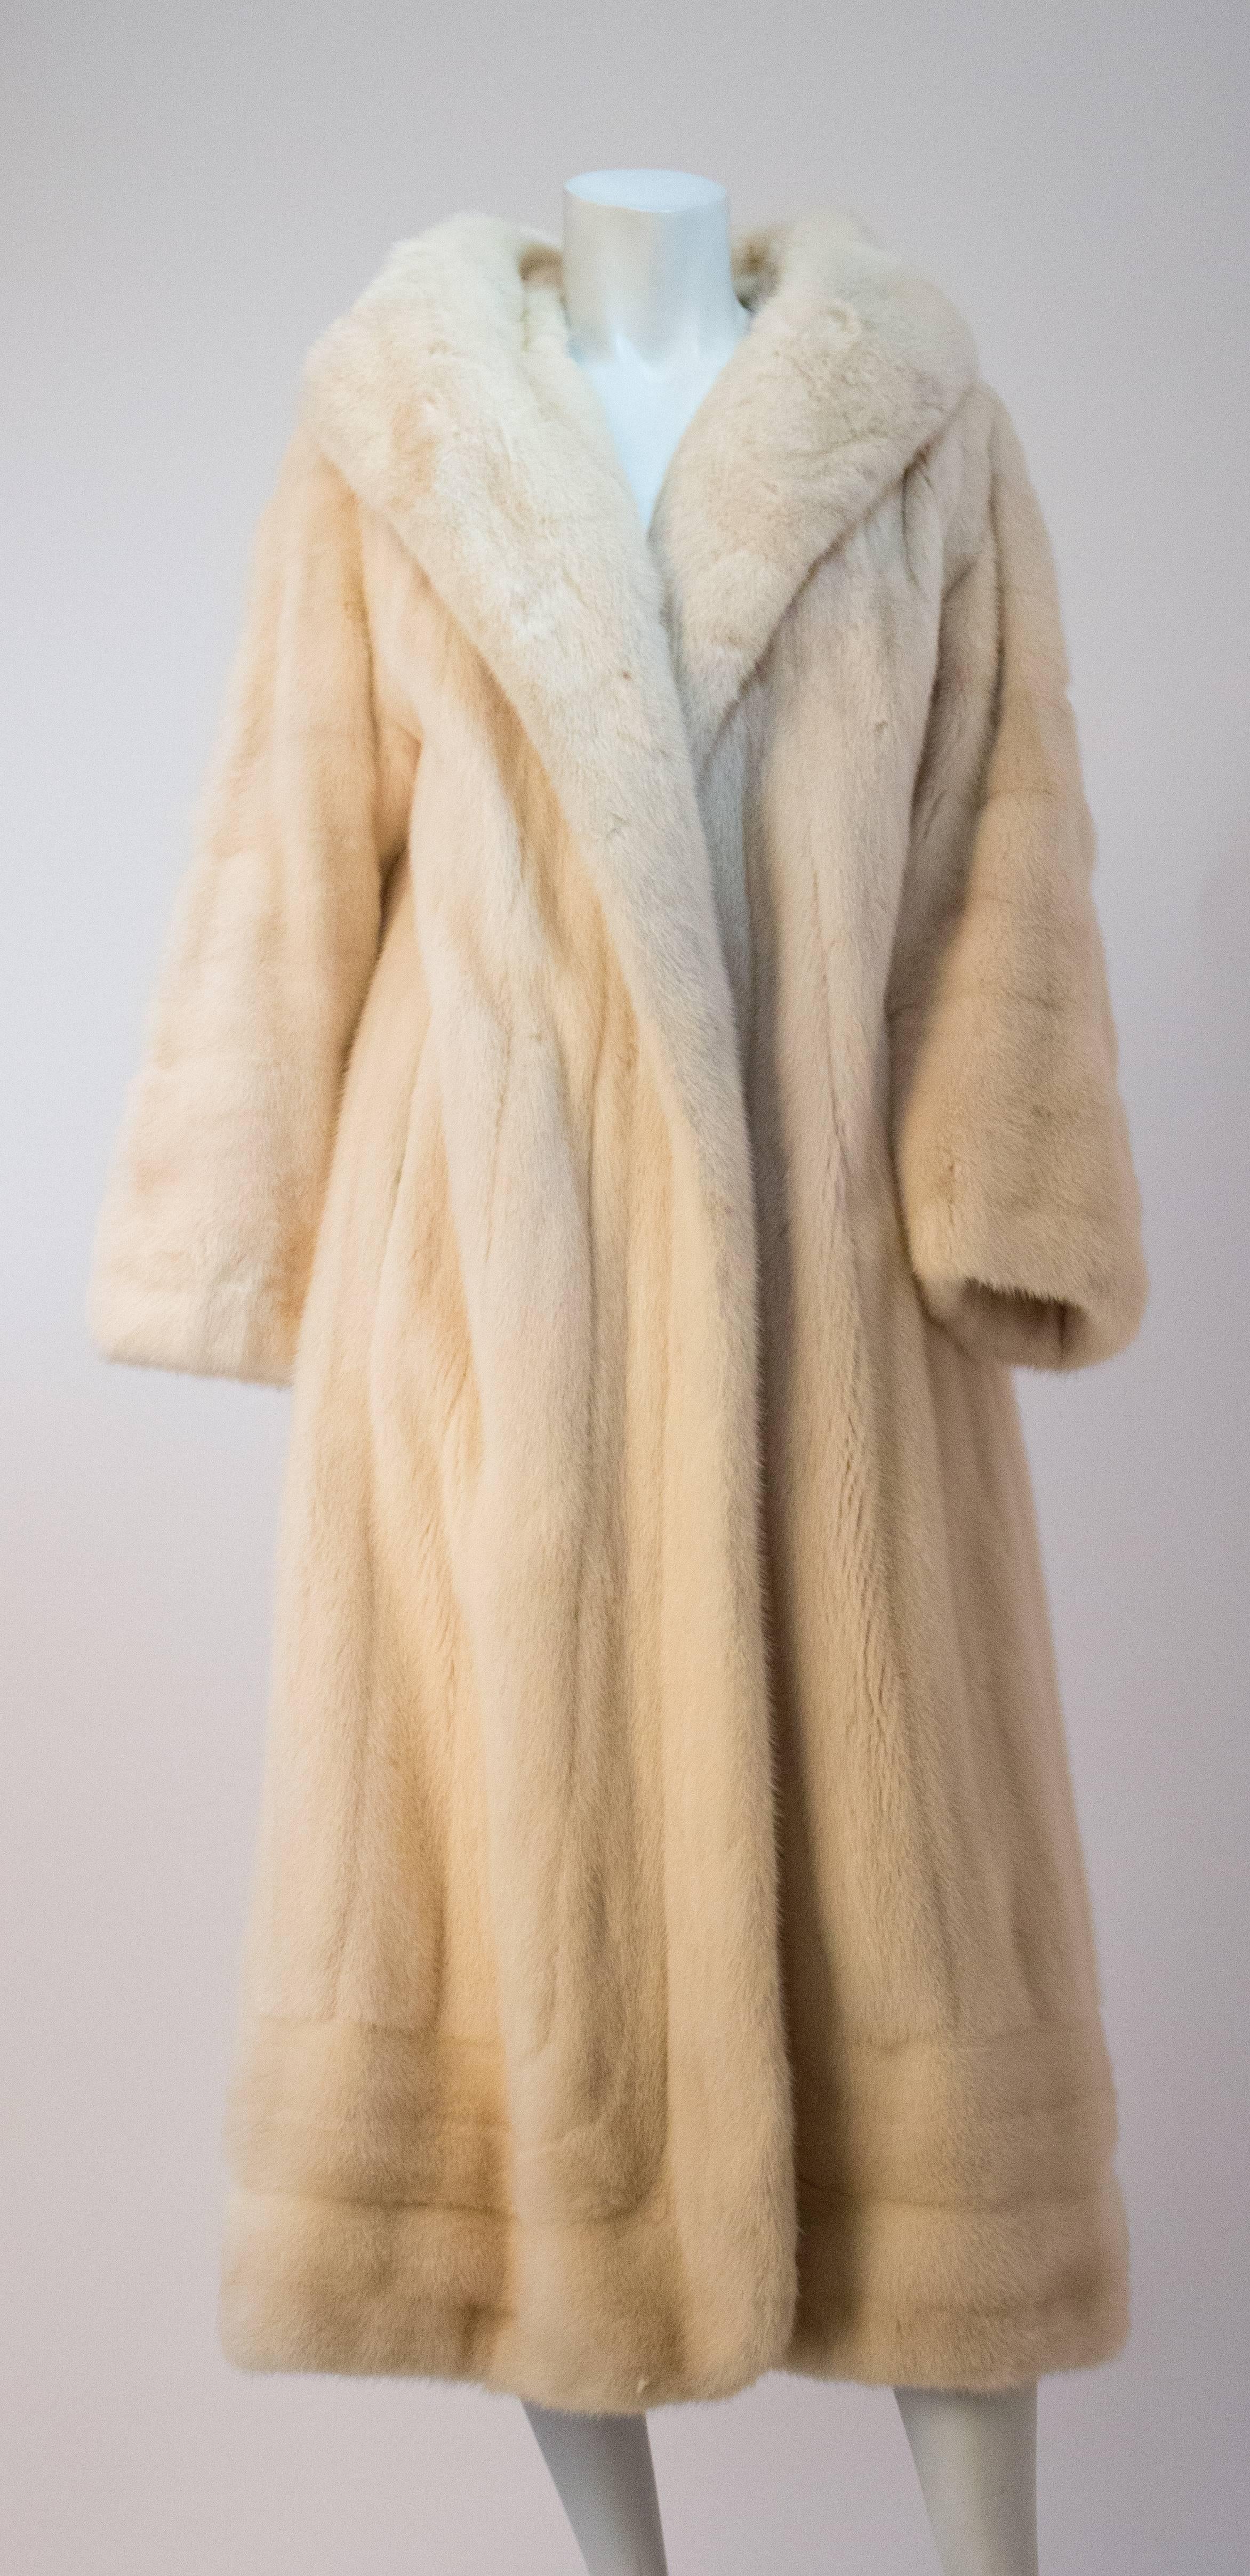 Full Length Cream Mink Fur Coat With Unusual Large Framing Collar. Fully lined. Lining is partially quilted. Invisible side pockets. Interior pocket tag reads 